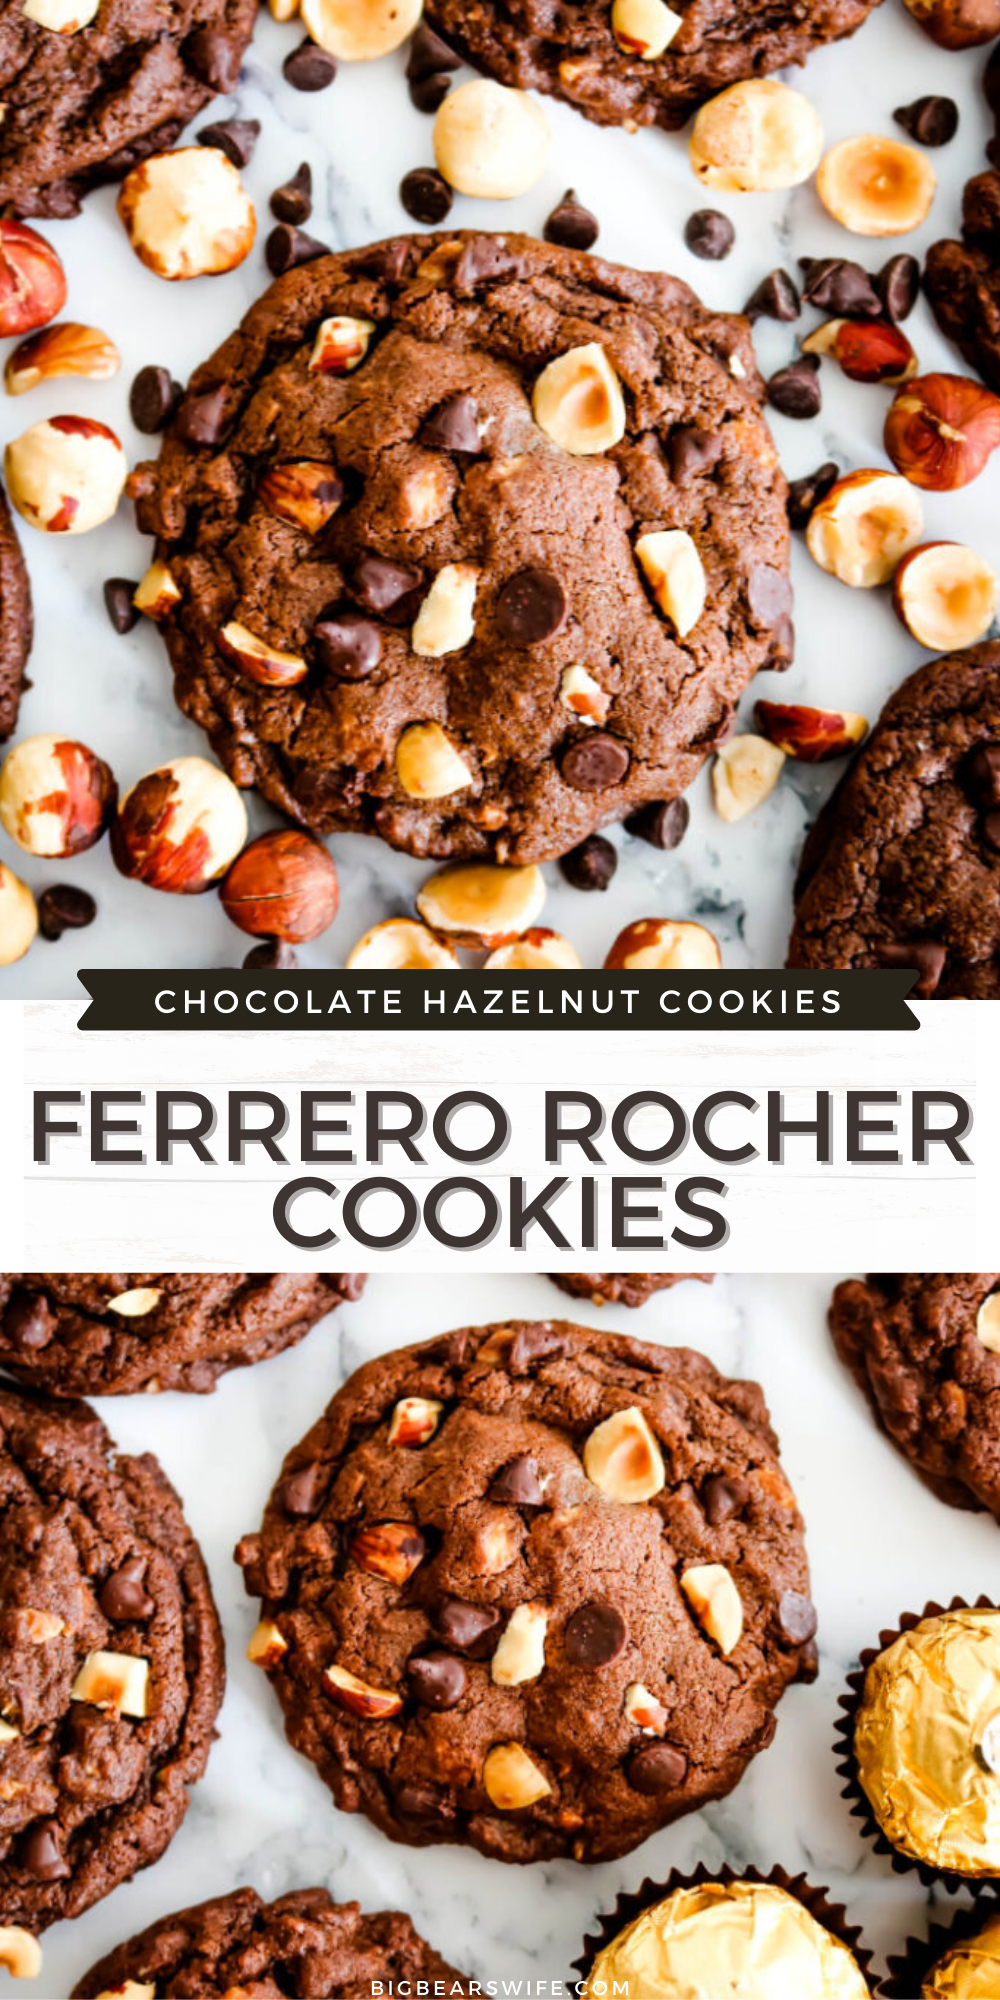 Ferrero Rocher Cookies - These delicious Ferrero Rocher Cookies take the amazing flavors of Ferrero Rocher Chocolates® and bake them into a bakery style treat. These homemade chocolate cookies are not only soft, but also packed with toasted hazelnuts and mini chocolate chips.  via @bigbearswife